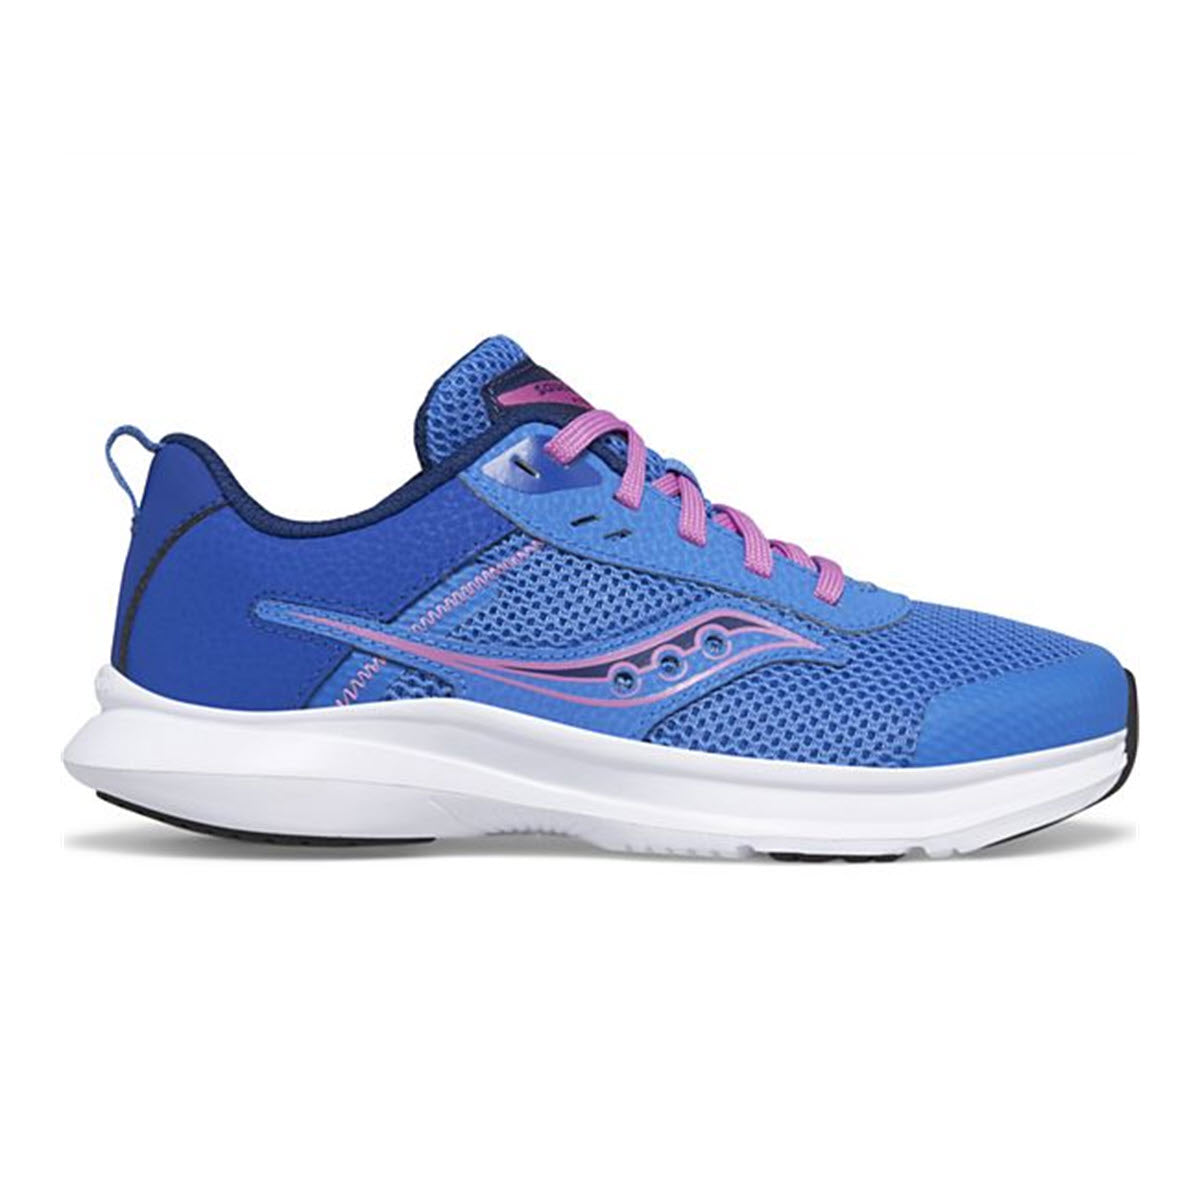 A blue and pink kids&#39; Saucony Axon 3 running shoe with white soles, featuring breathable mesh and a wavy design on the side.